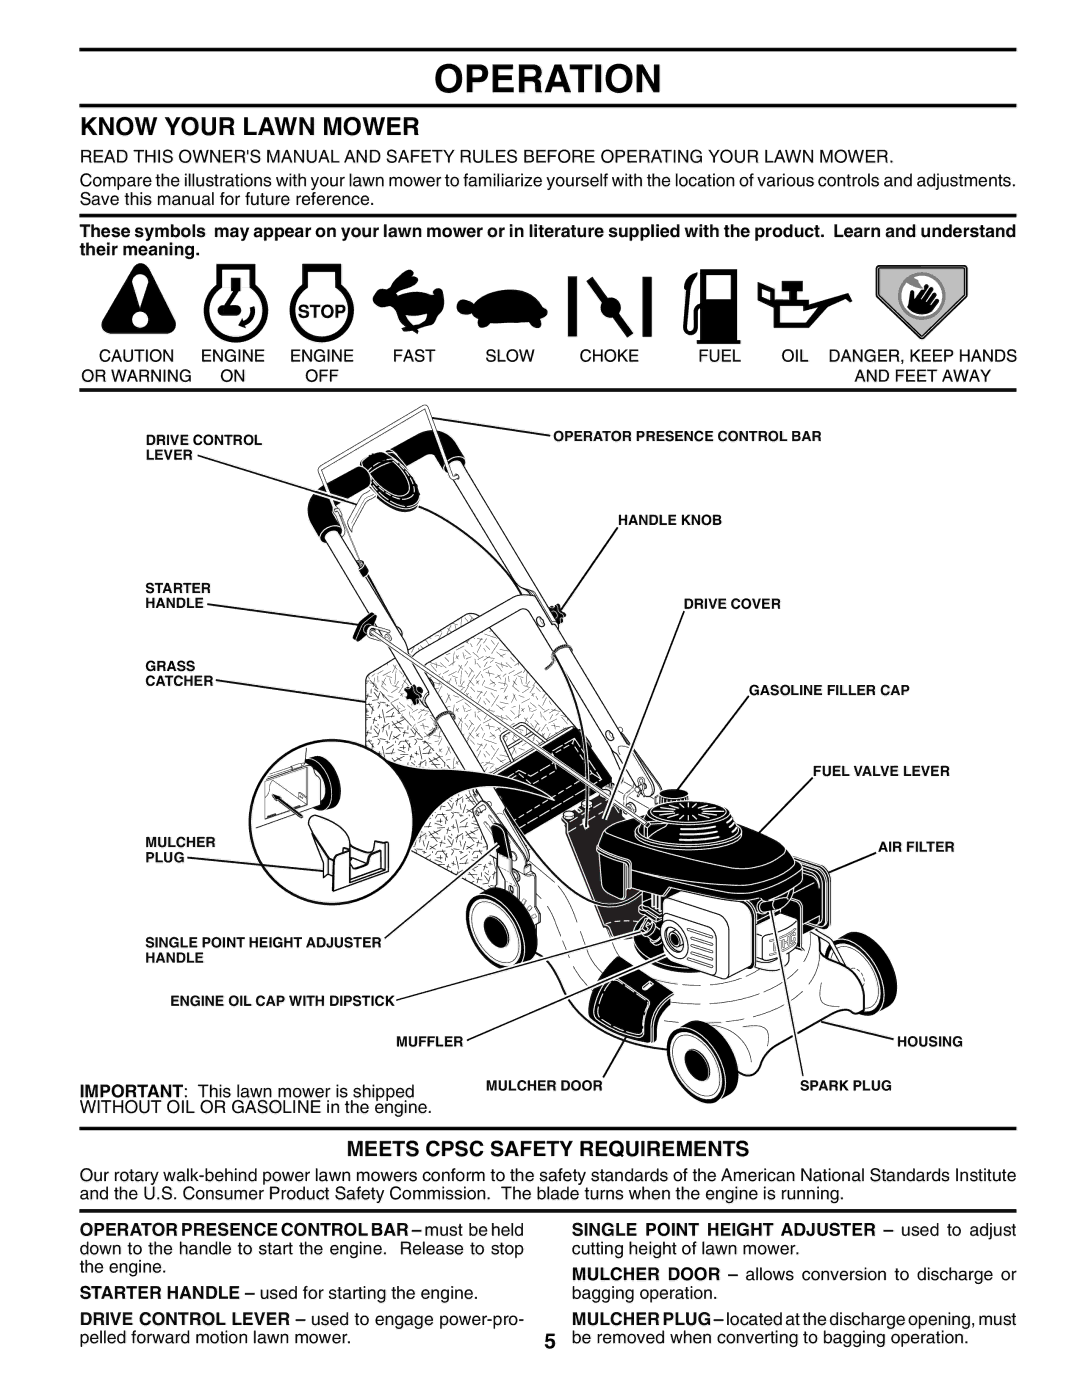 Husqvarna 5521RSX owner manual Operation, Know Your Lawn Mower, Meets Cpsc Safety Requirements 